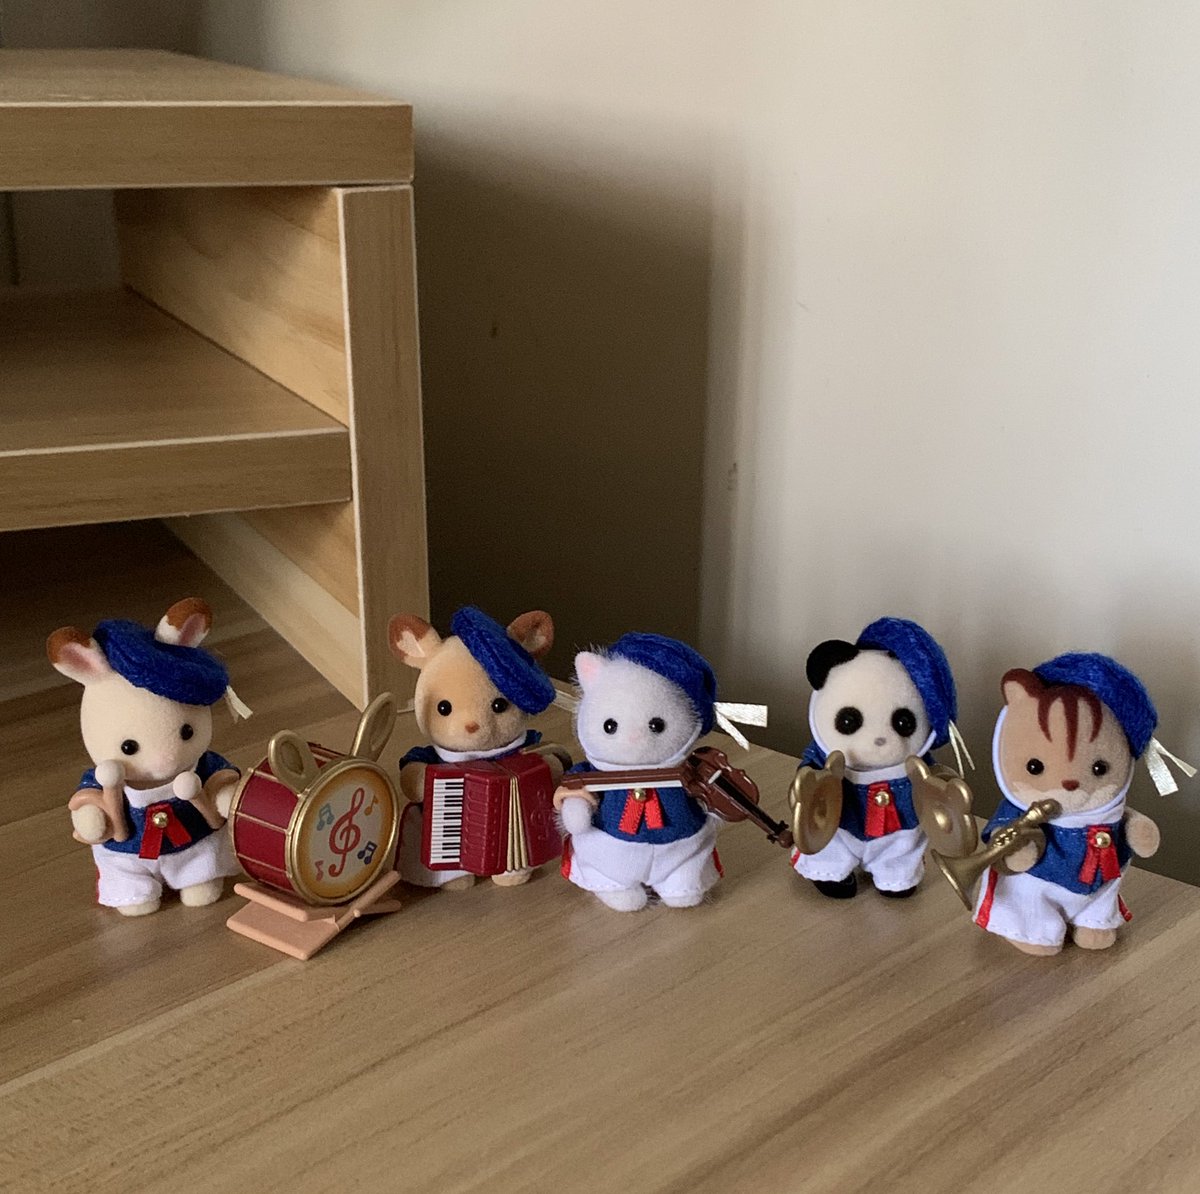 the tiniest marching band is here ✶⋆.˚꩜ .ᐟ